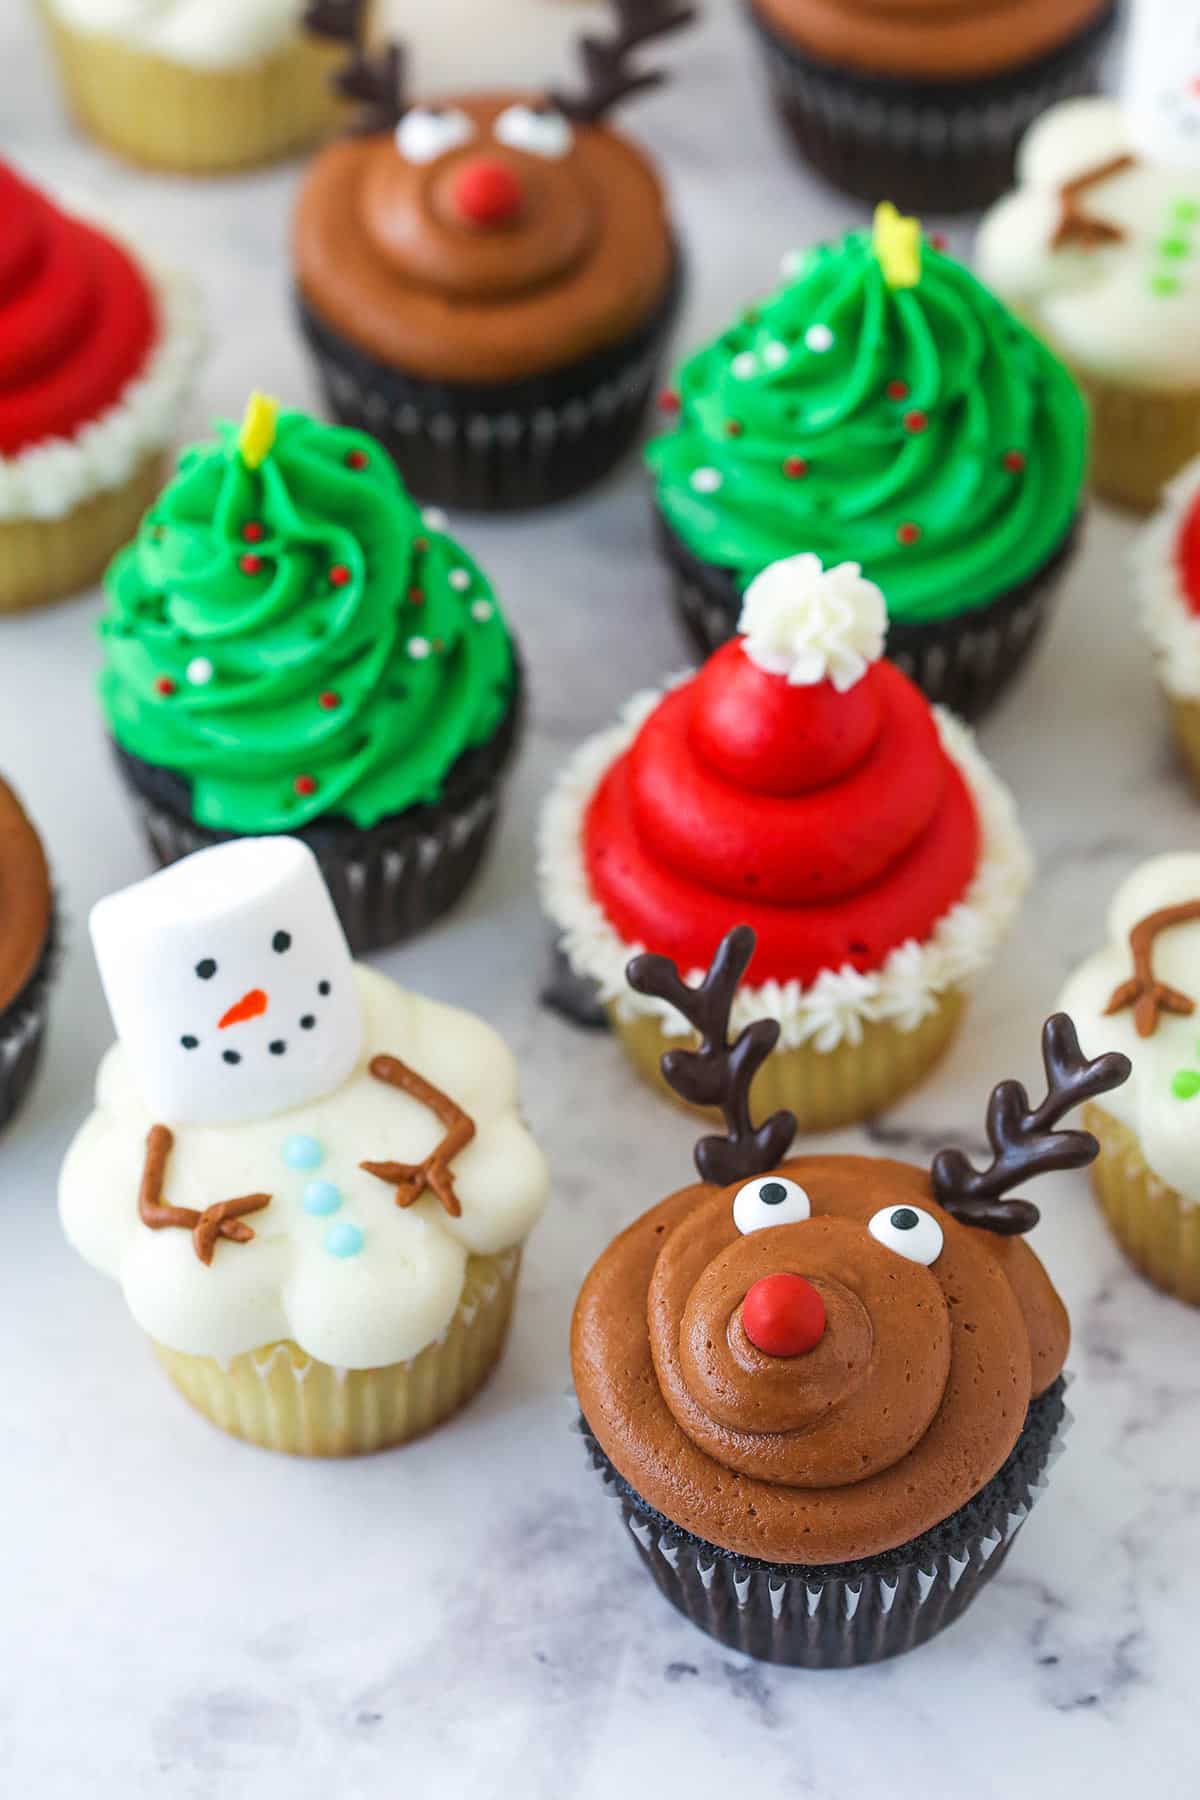 Easy Christmas Cupcakes (with video!) - Life Love and Sugar